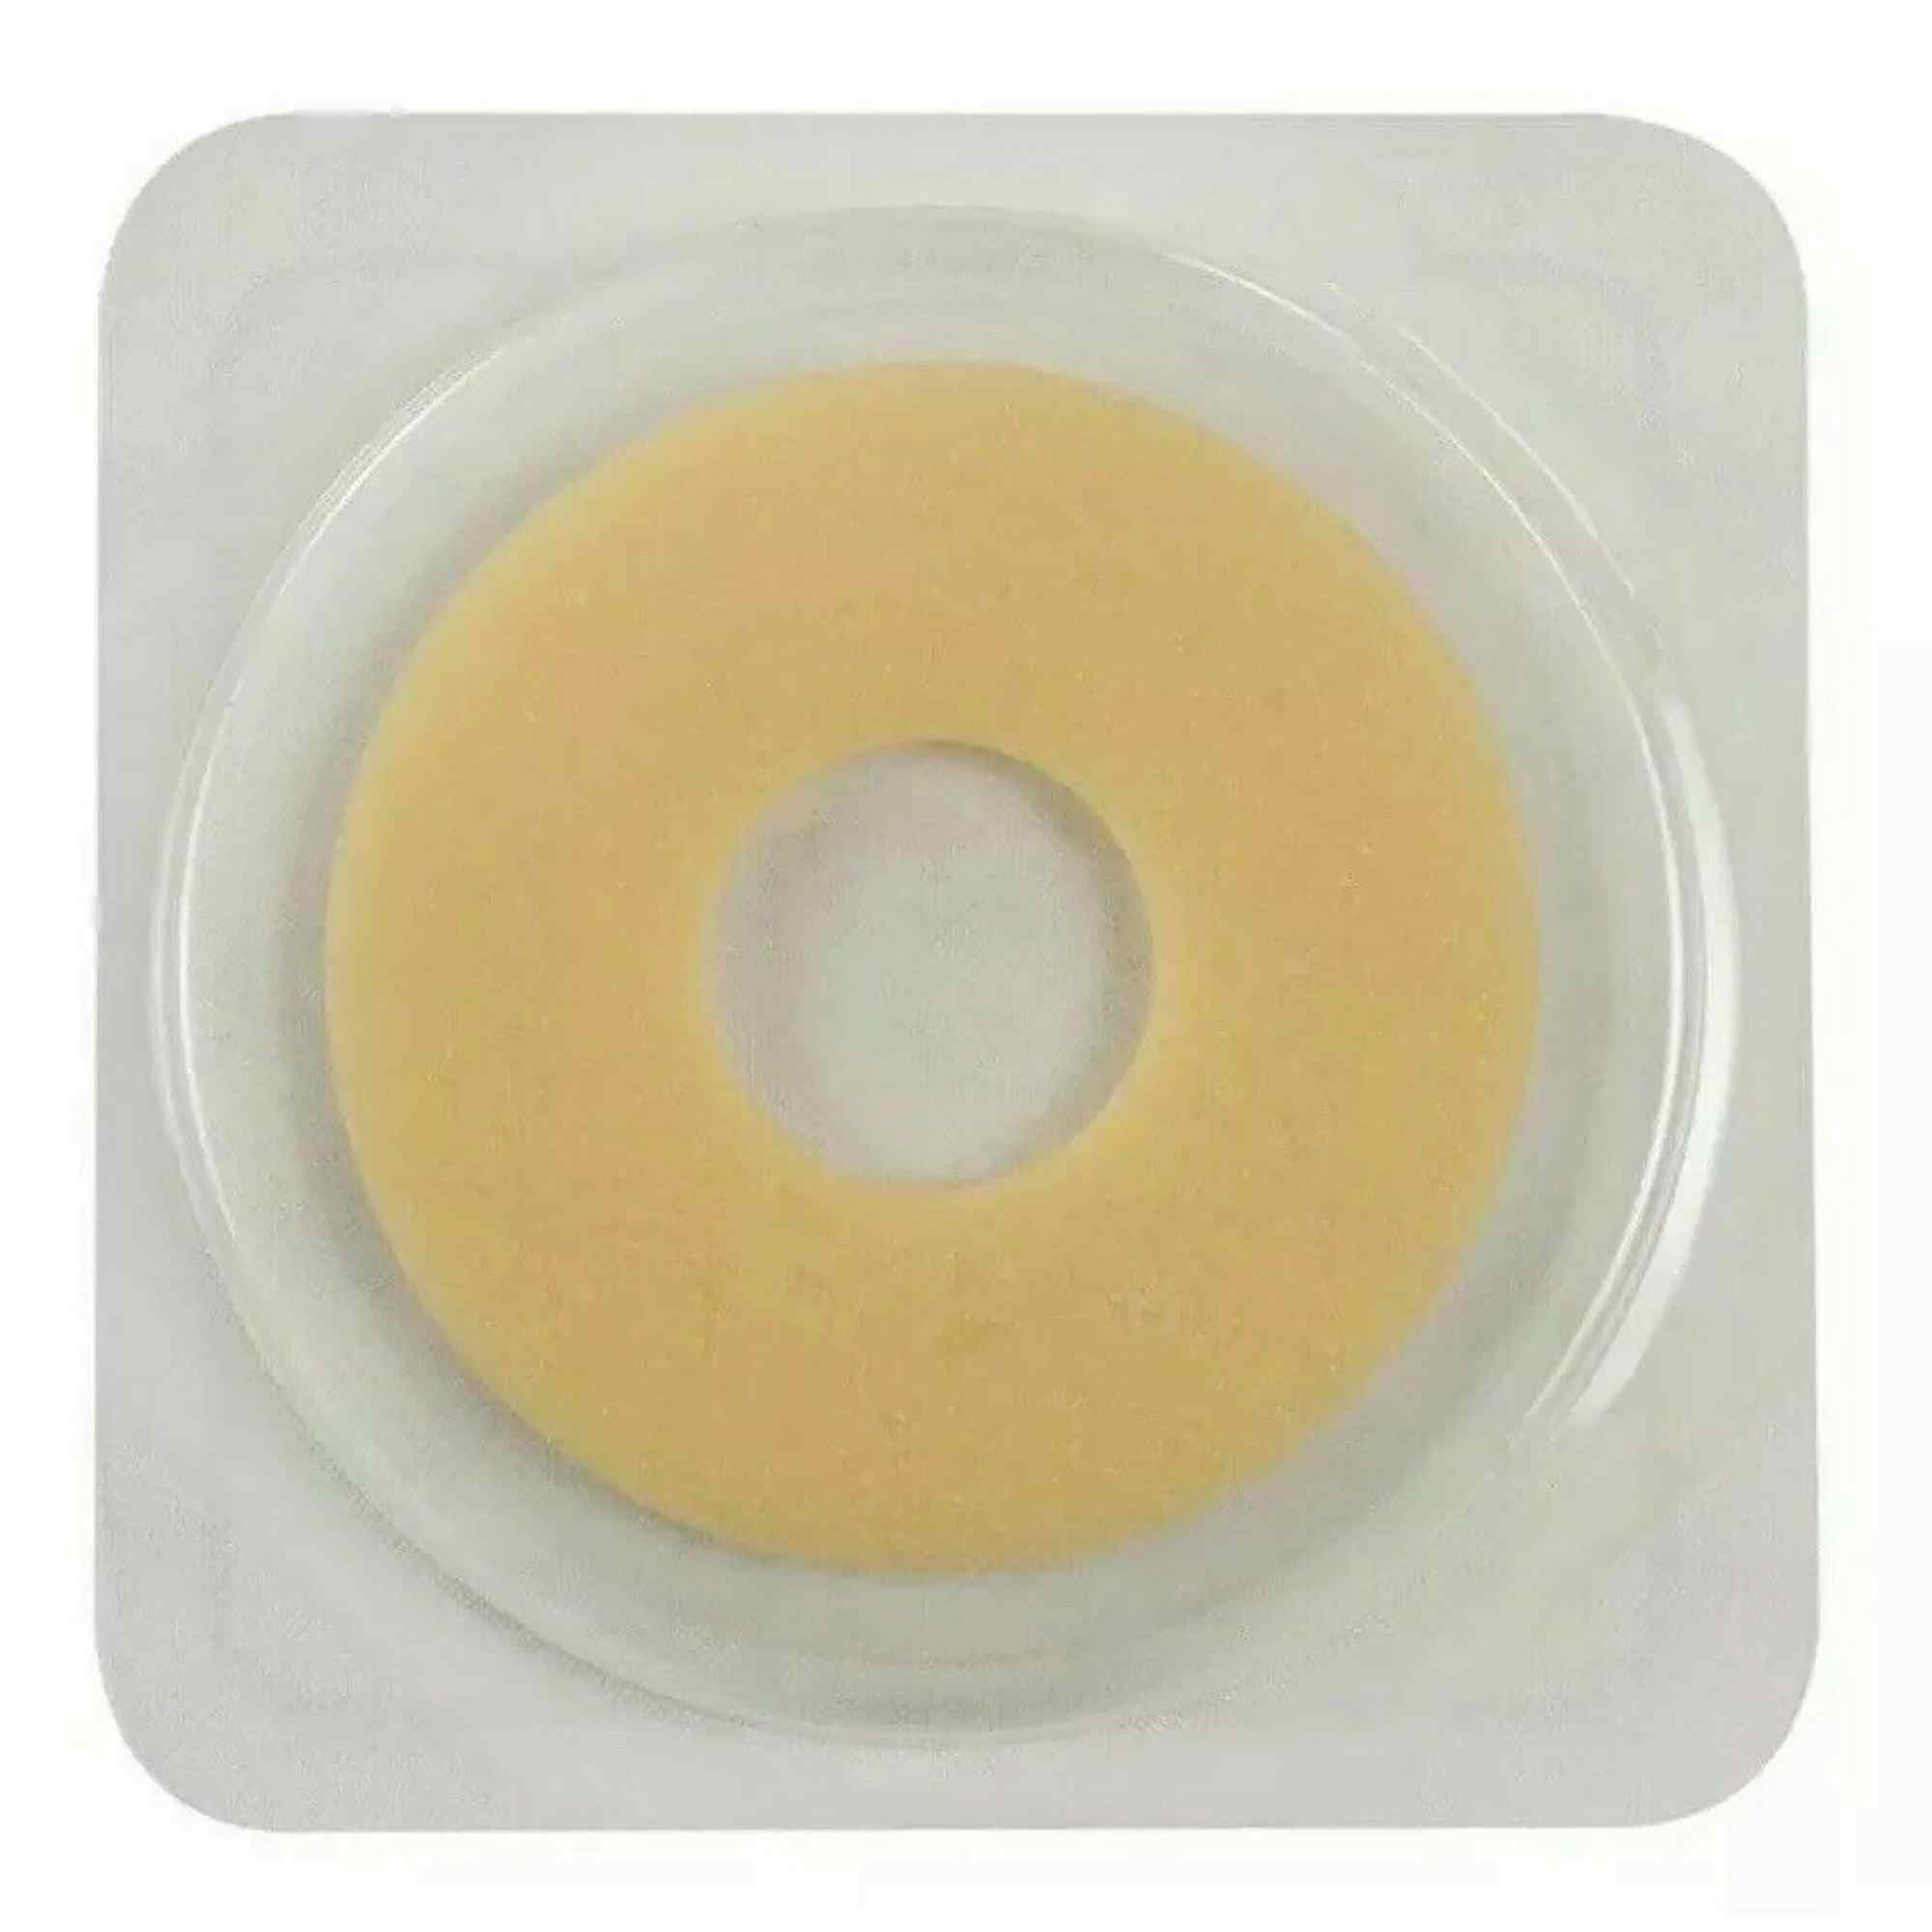 Eakin Cohesive Barrier Ring Seal 2", Small